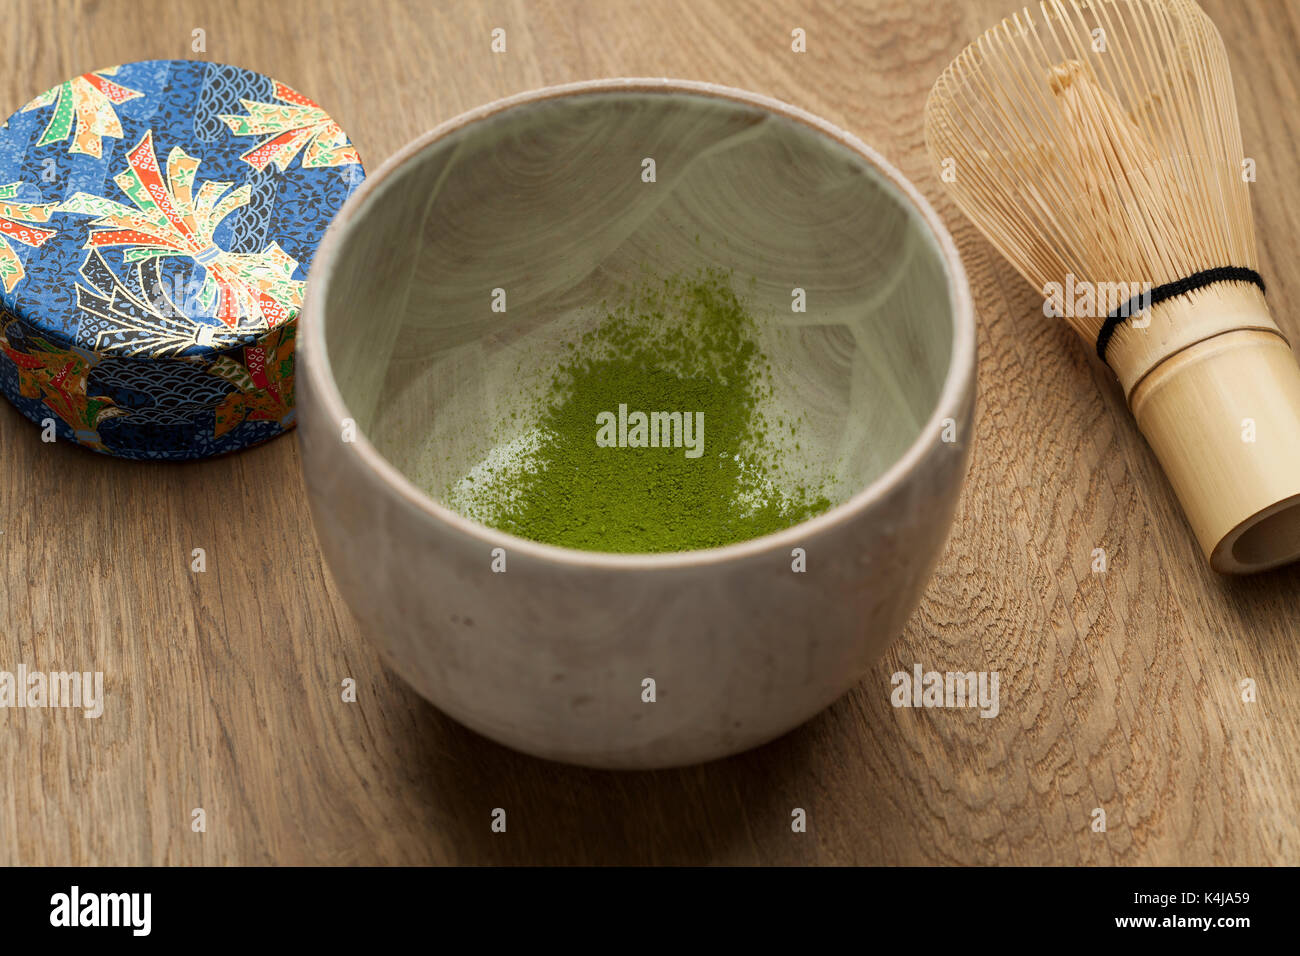 Preparing a bowl of matcha tea with a tea whisk Stock Photo